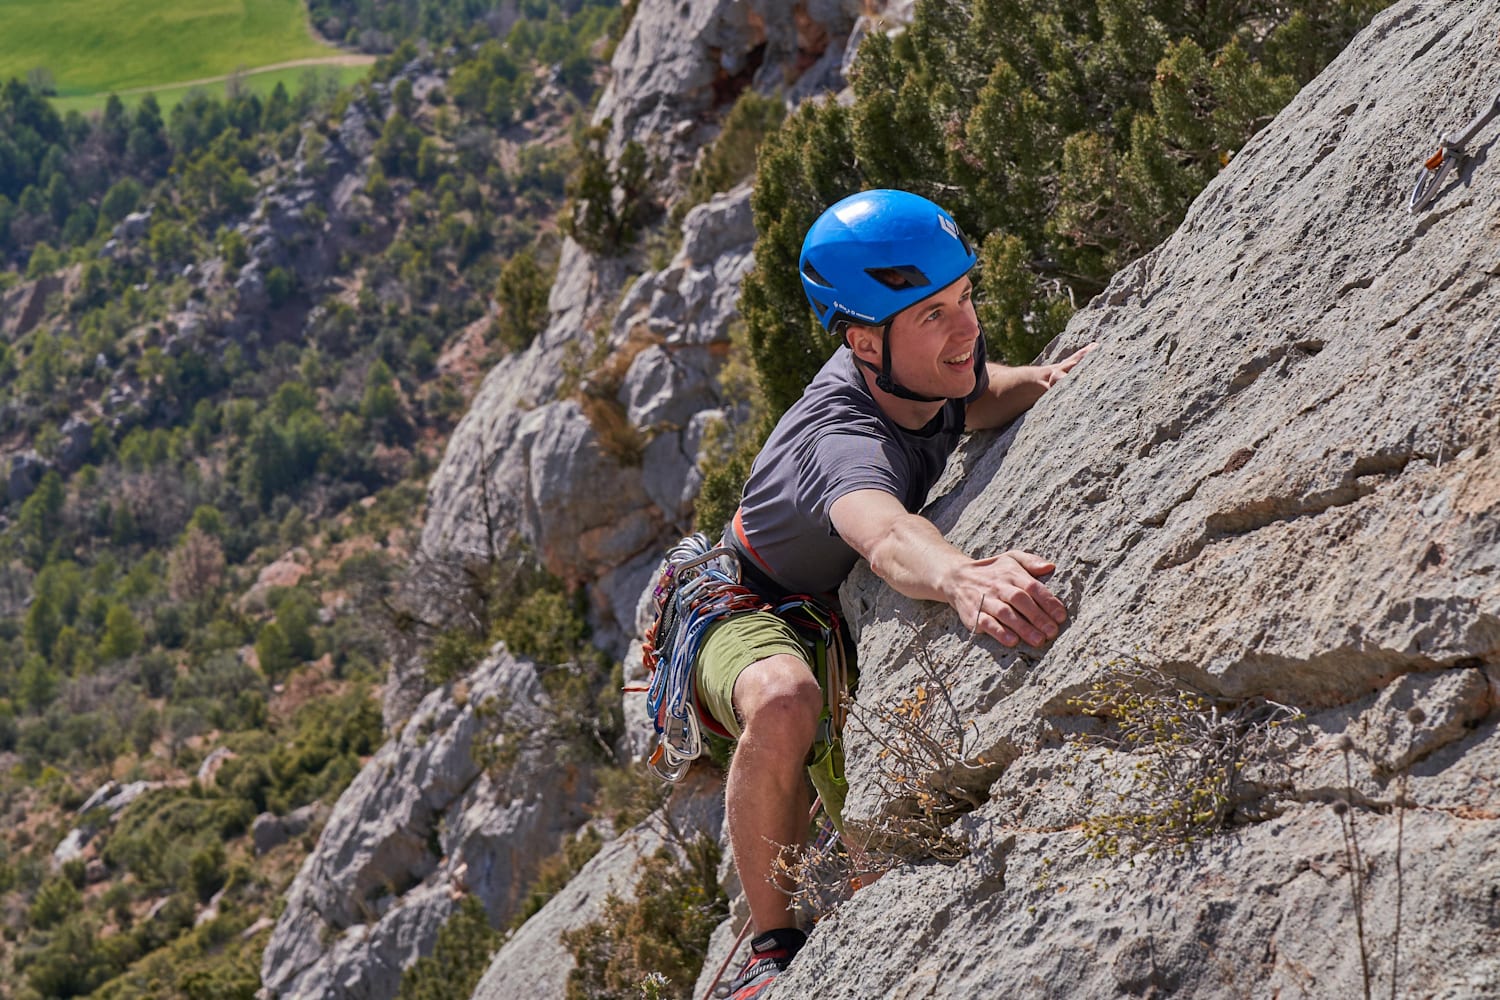 Everything You Need To Know About Climbing Post-Pandemic